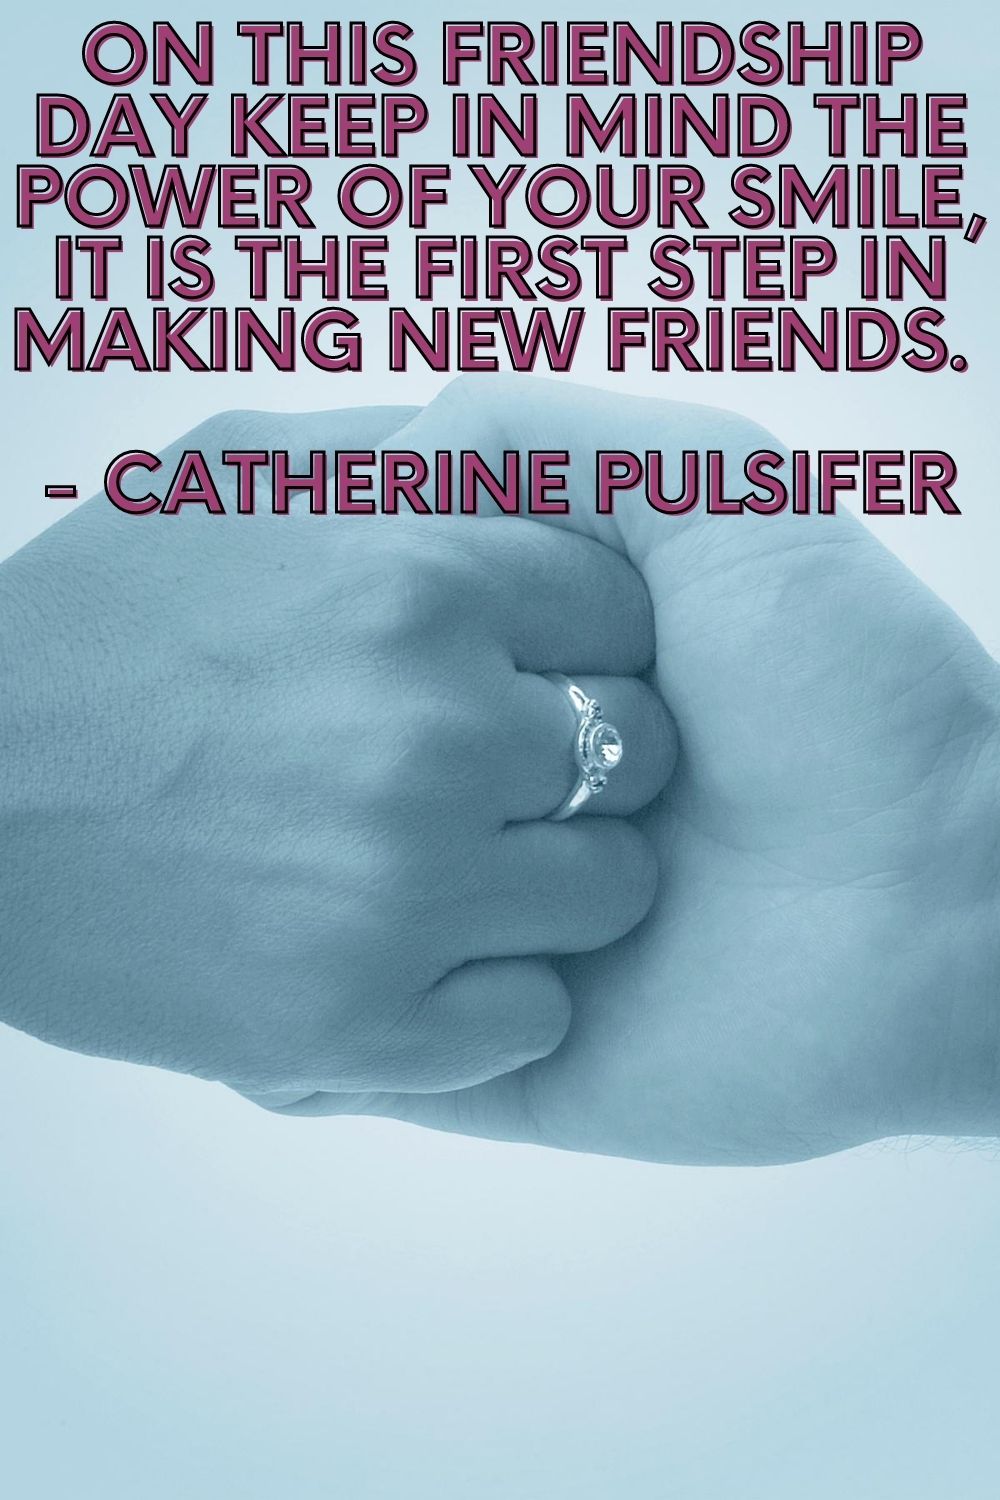 On this Friendship Day keep in mind the power of your smile it is the first step in making new friends. Catherine Pulsifer